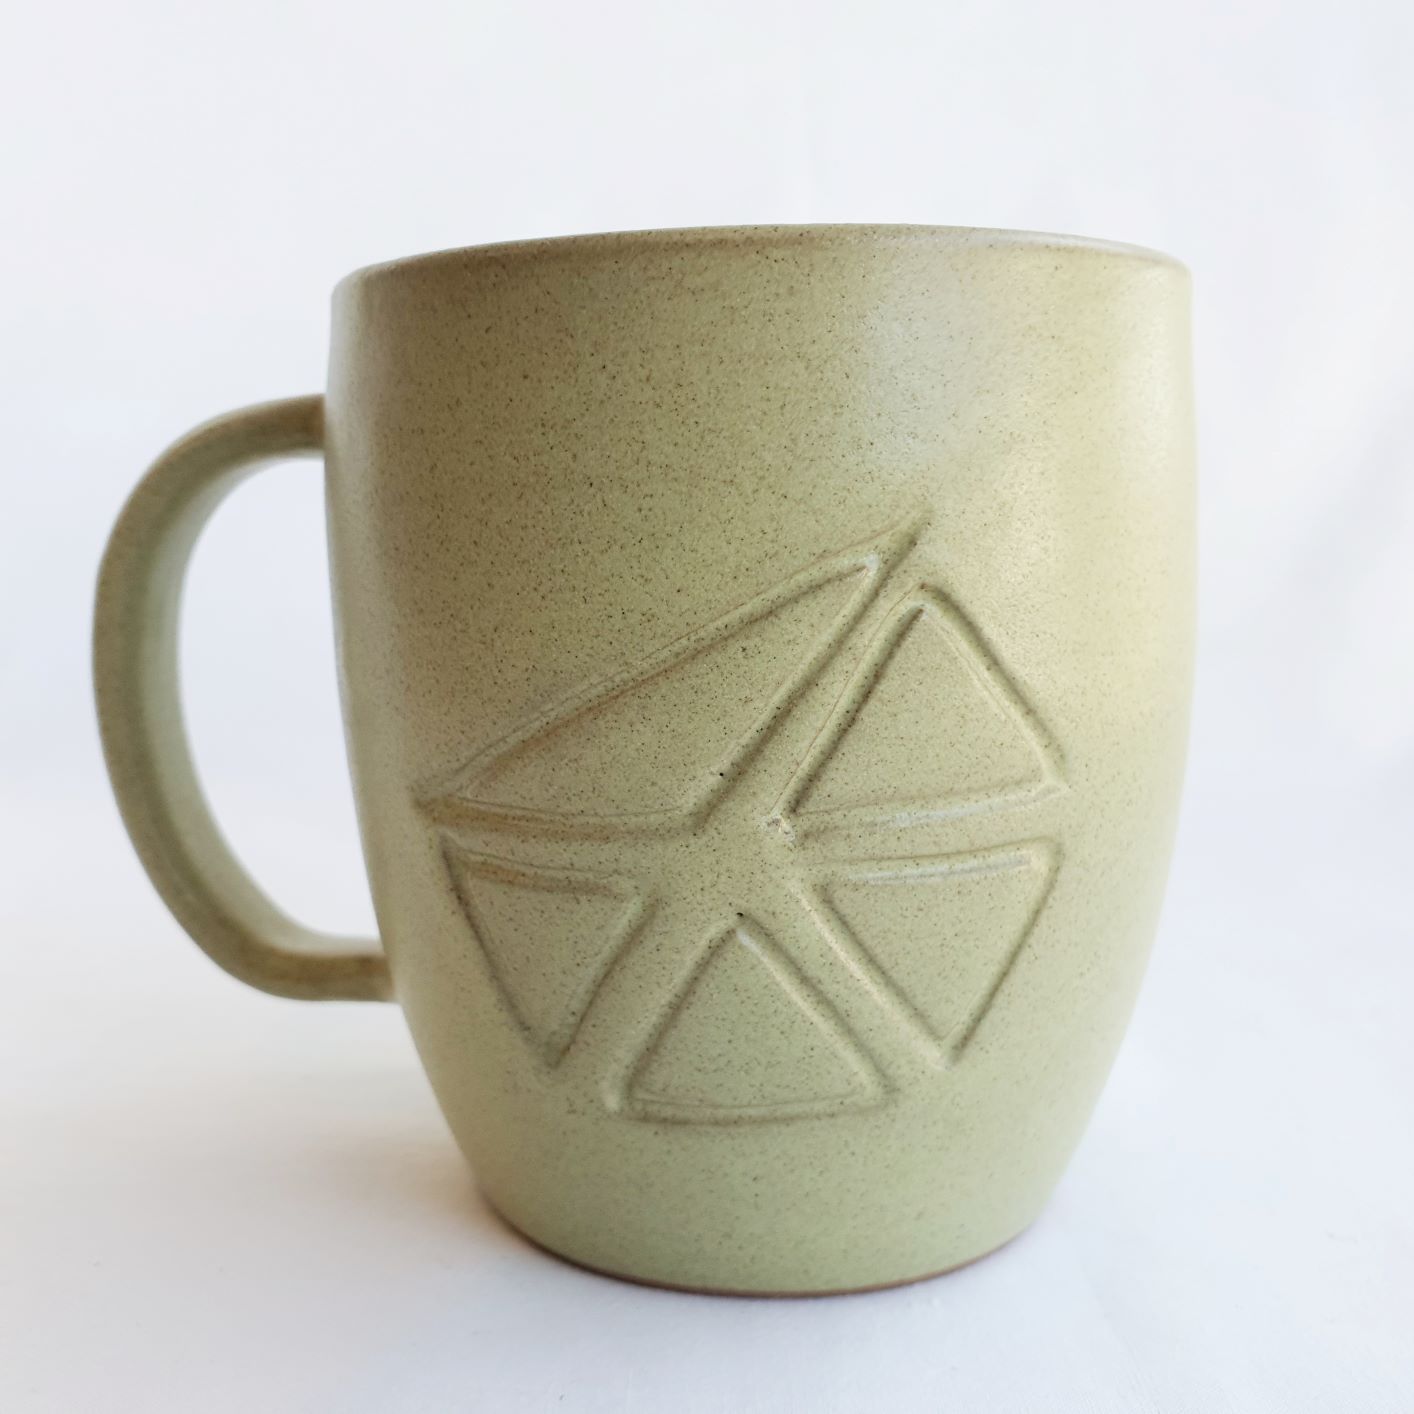 A handmade large green ceramic mug with handle and carved Aboriginal motif on front